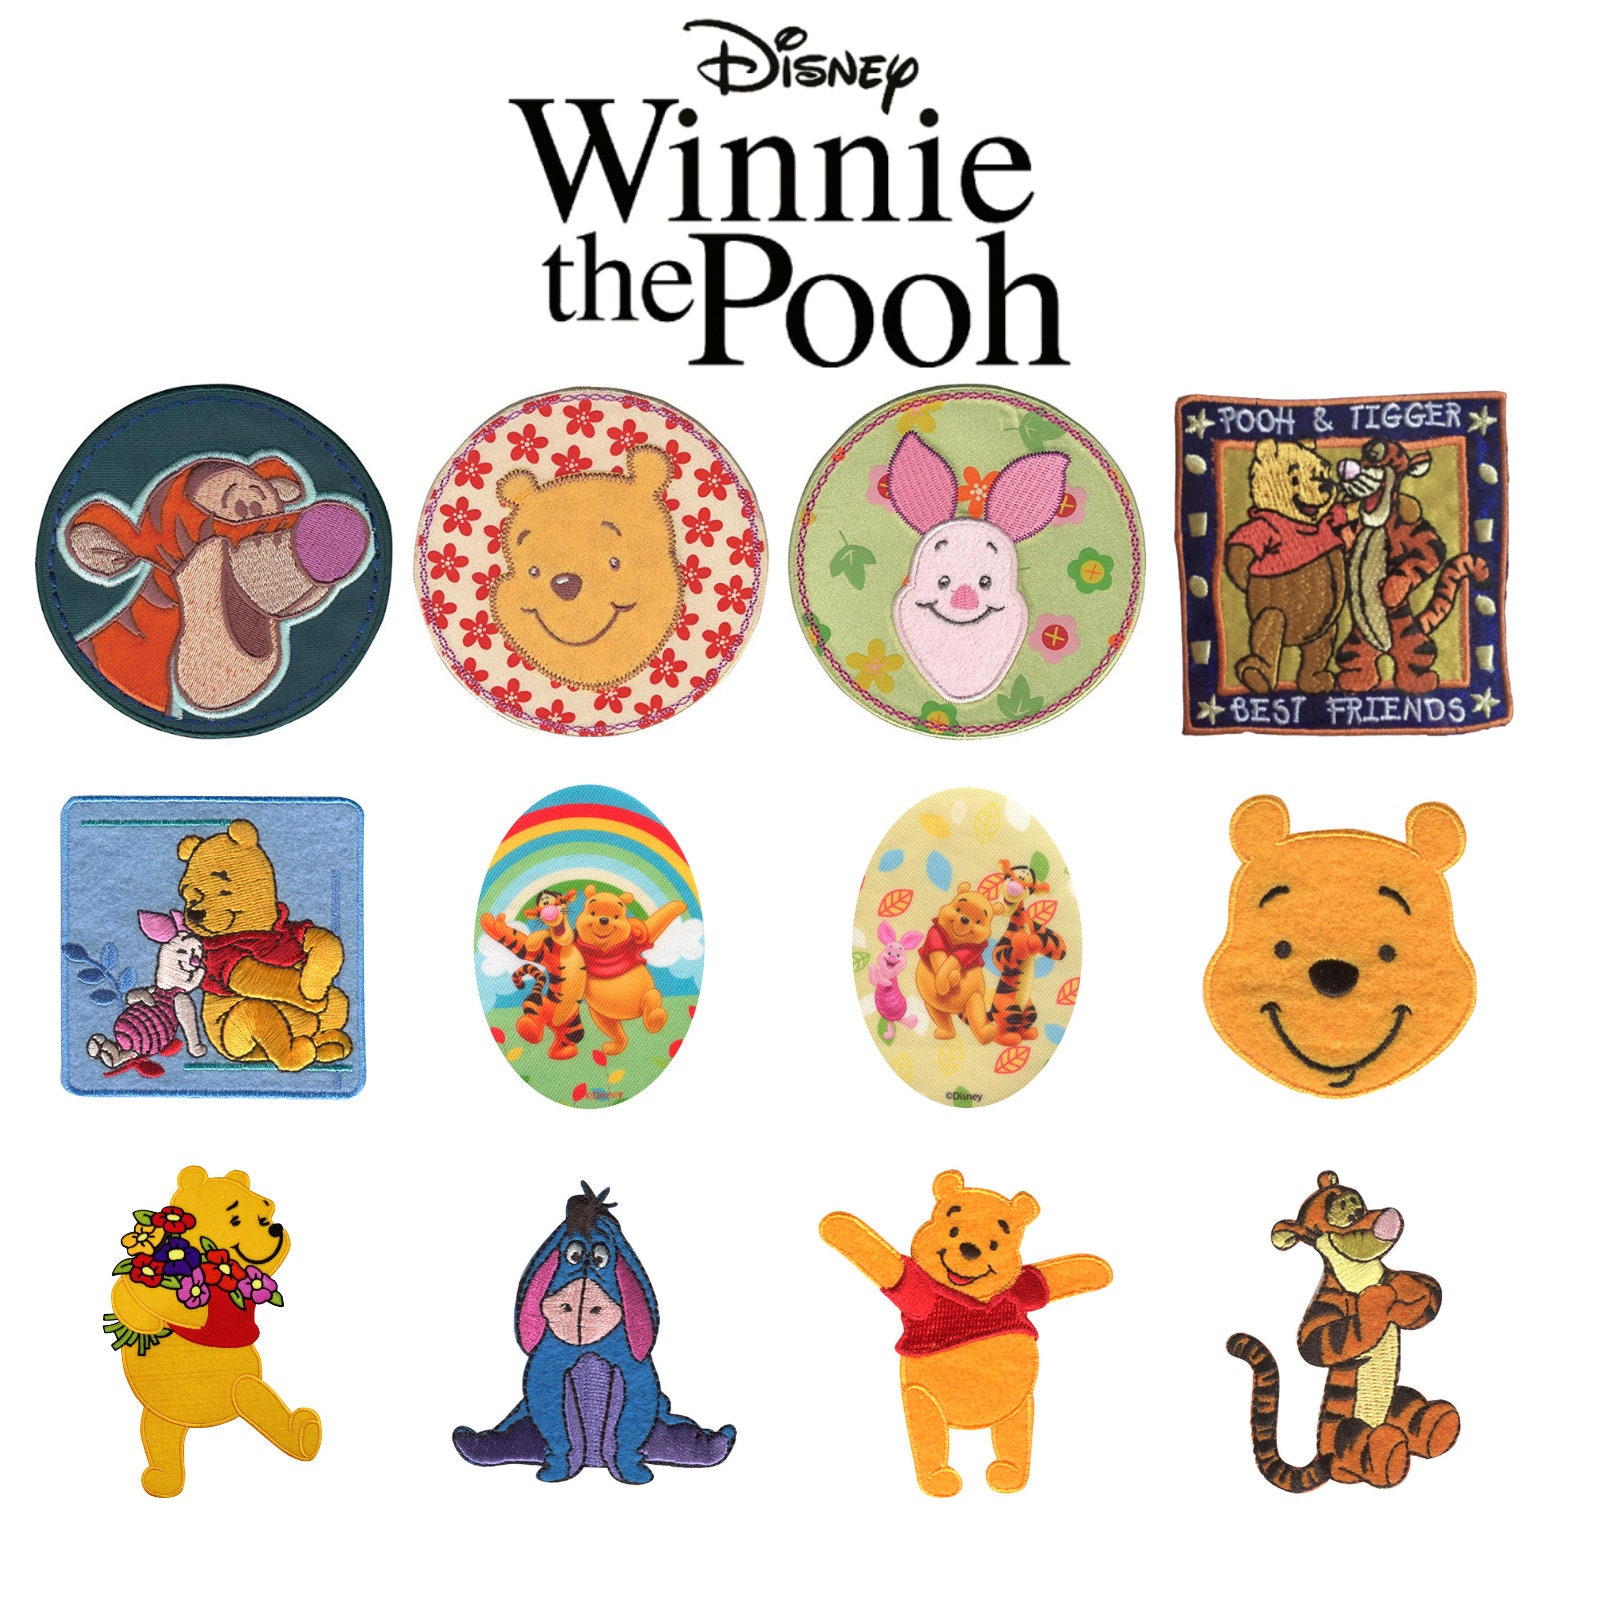 Disney Winnie the Pooh and Piglet Blue Balloon Embroidered Patch / Iron on  Patch / Clothes Material Patch / Iron or Sew / Disney Patch 